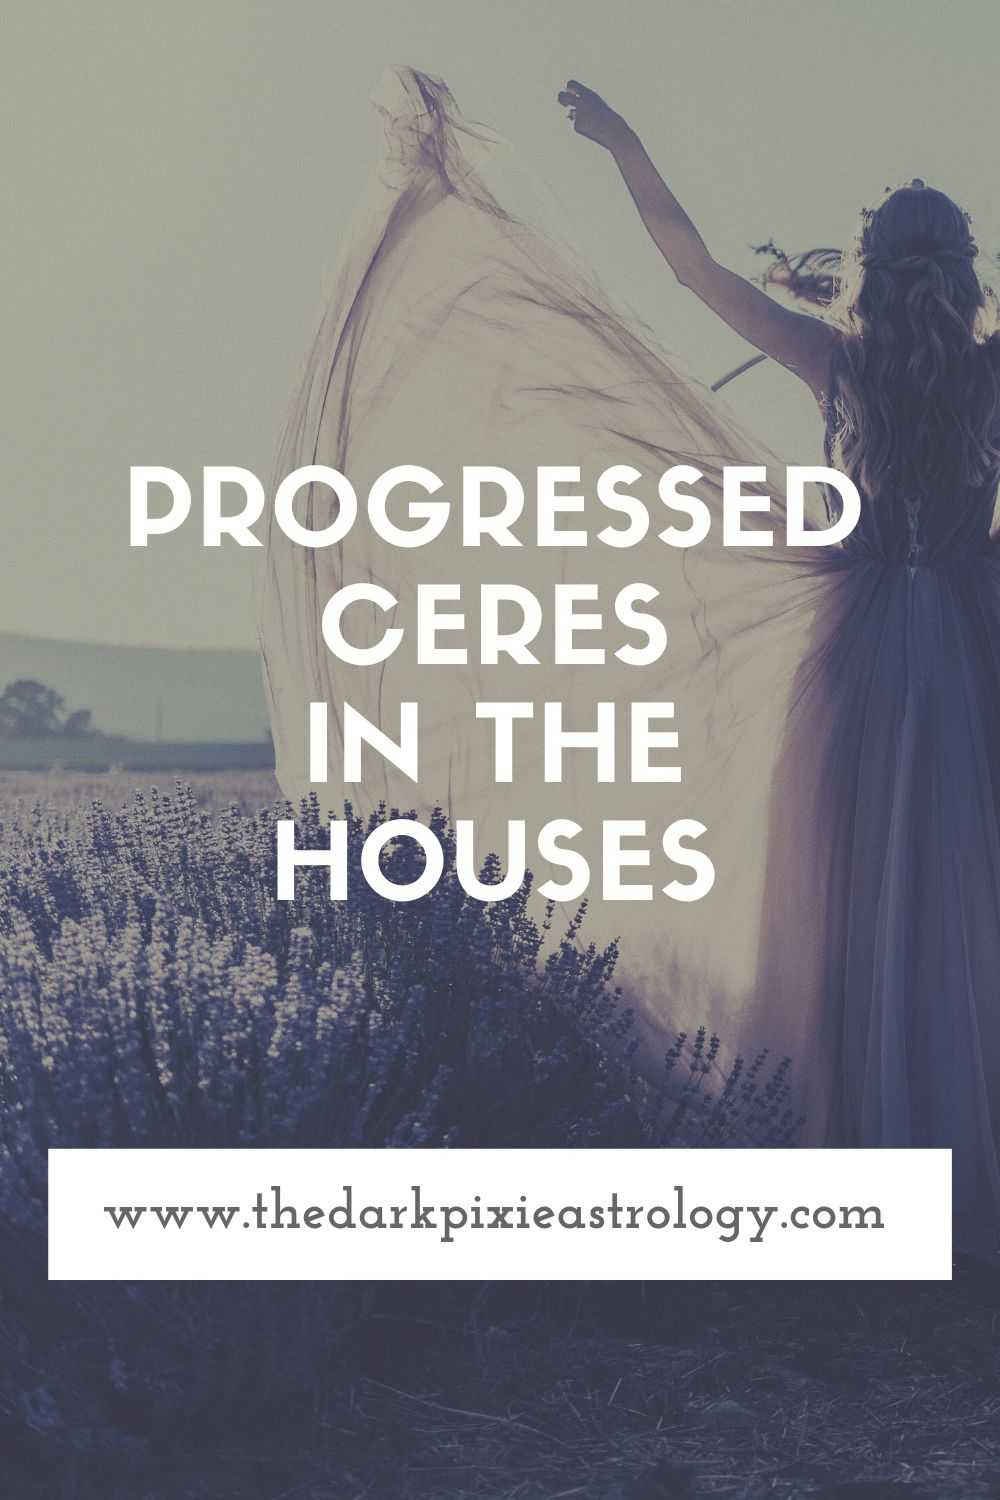 Progressed Ceres in the Houses - The Dark Pixie Astrology